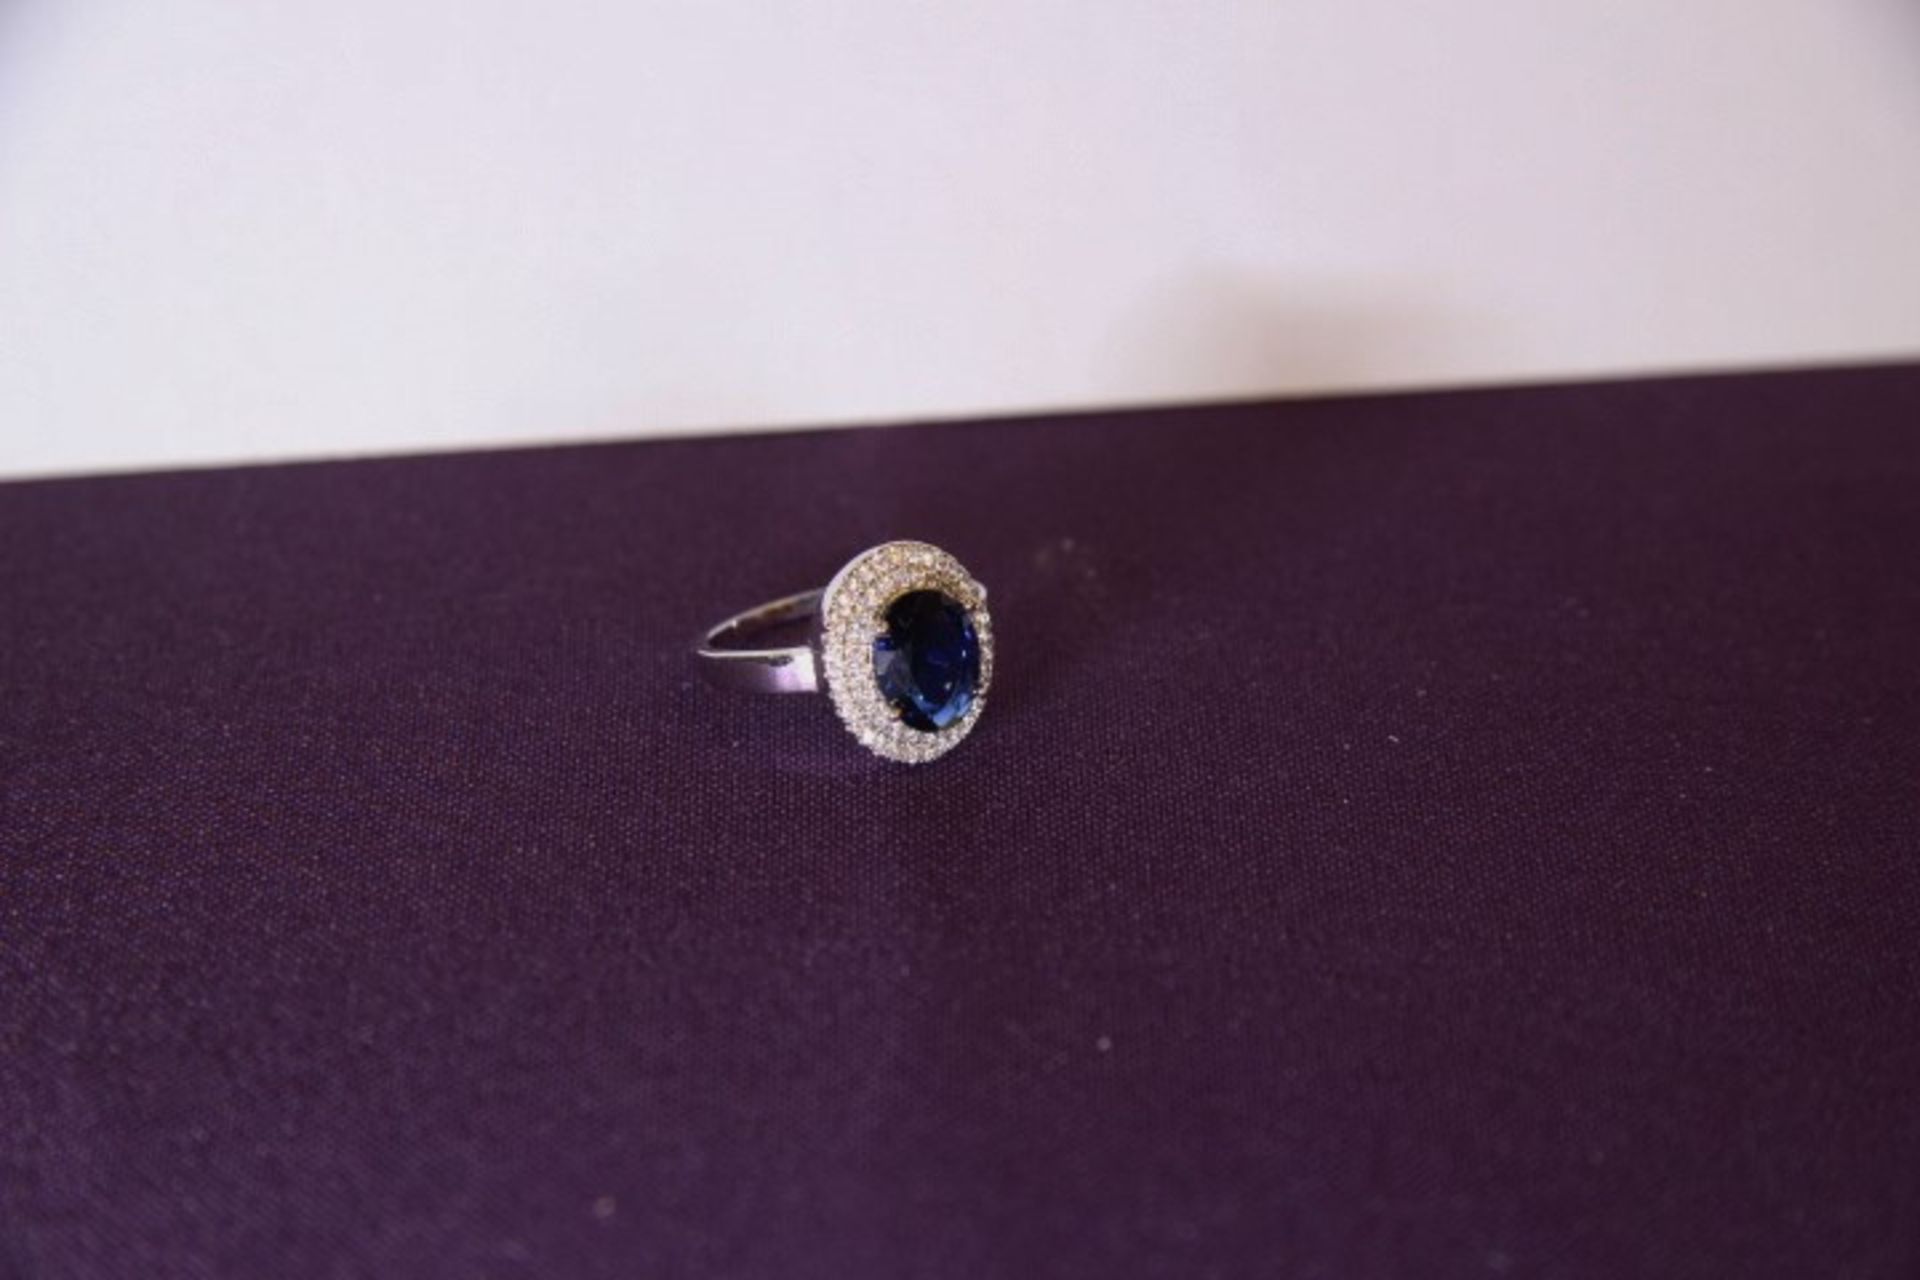 V Brand New Platinum Plated Blue and White Stone Ring X 2 YOUR BID PRICE TO BE MULTIPLIED BY TWO